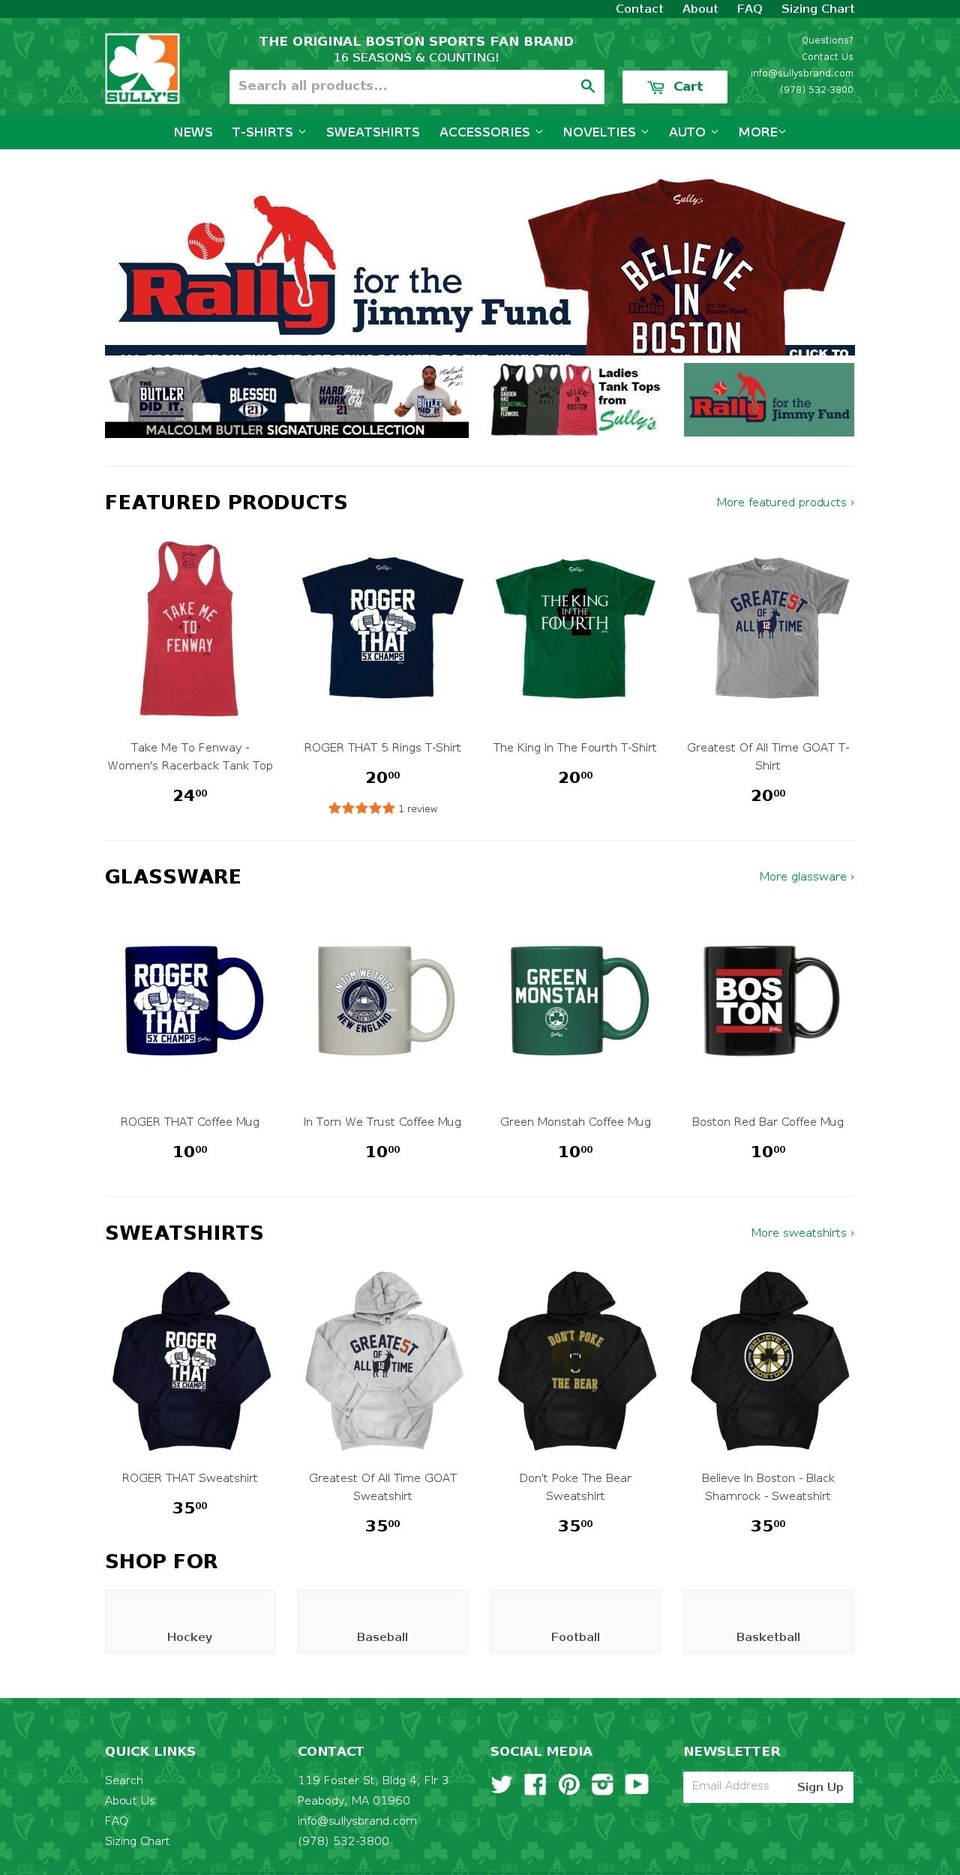 Sully's Brand Shopify theme site example bostoncrew.com